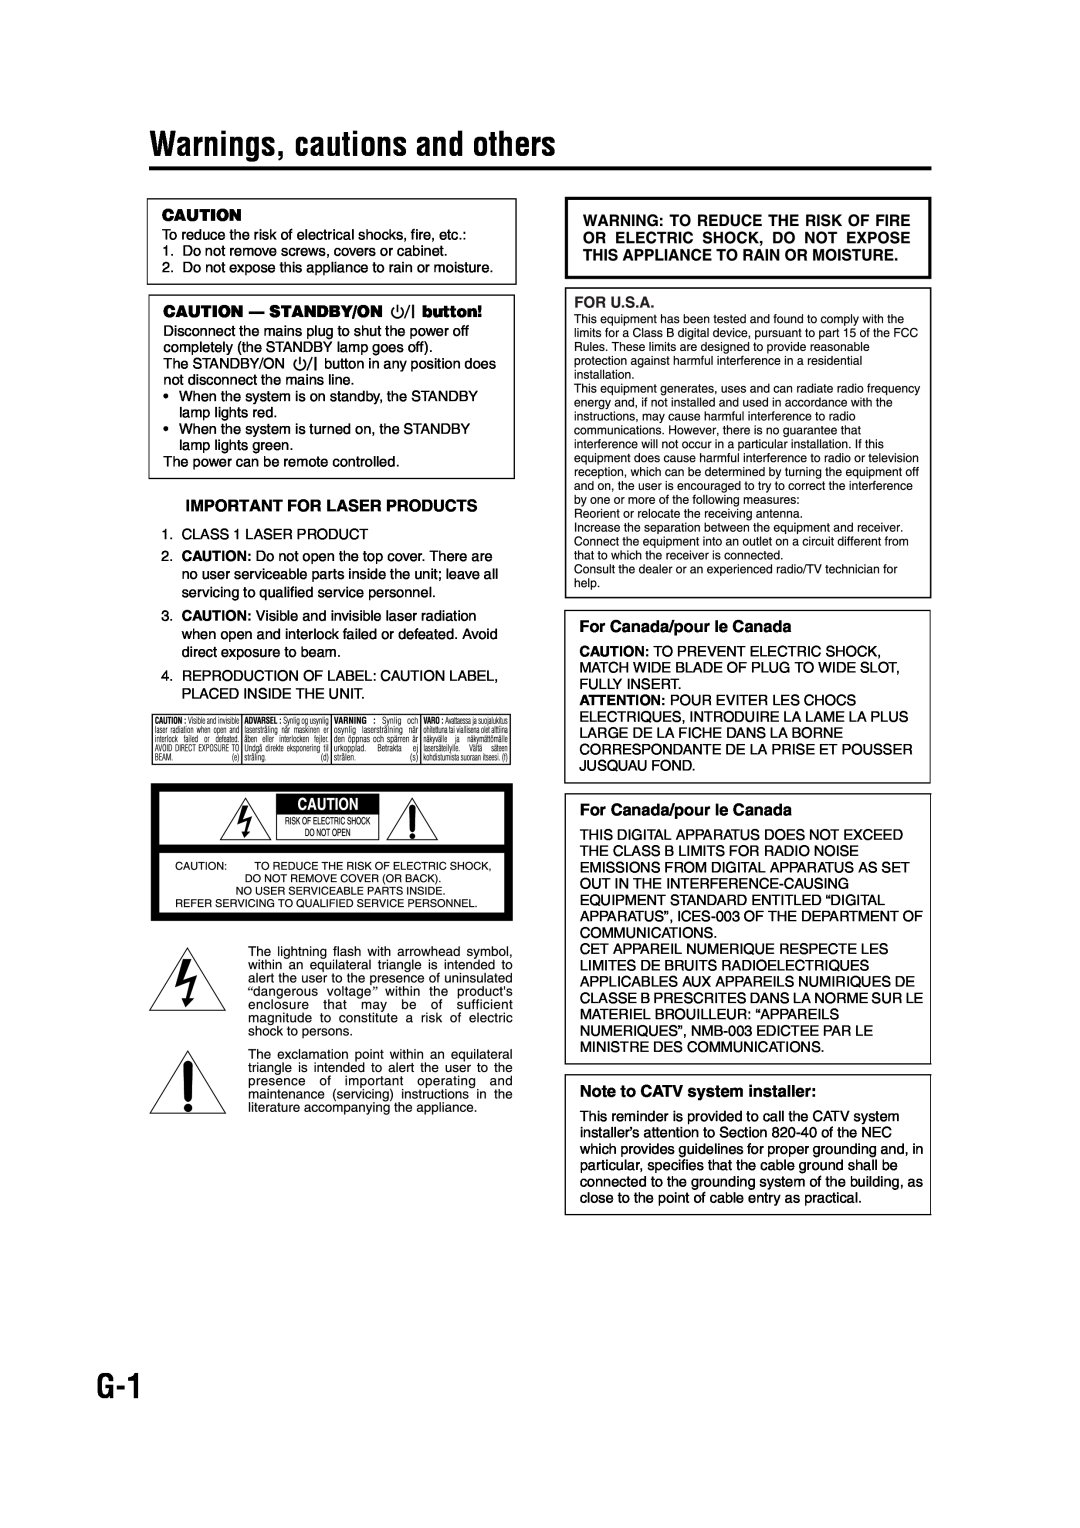 JVC GVT0142-001A manual Warnings, cautions and others, CAUTION — STANDBY/ON button, Important For Laser Products 